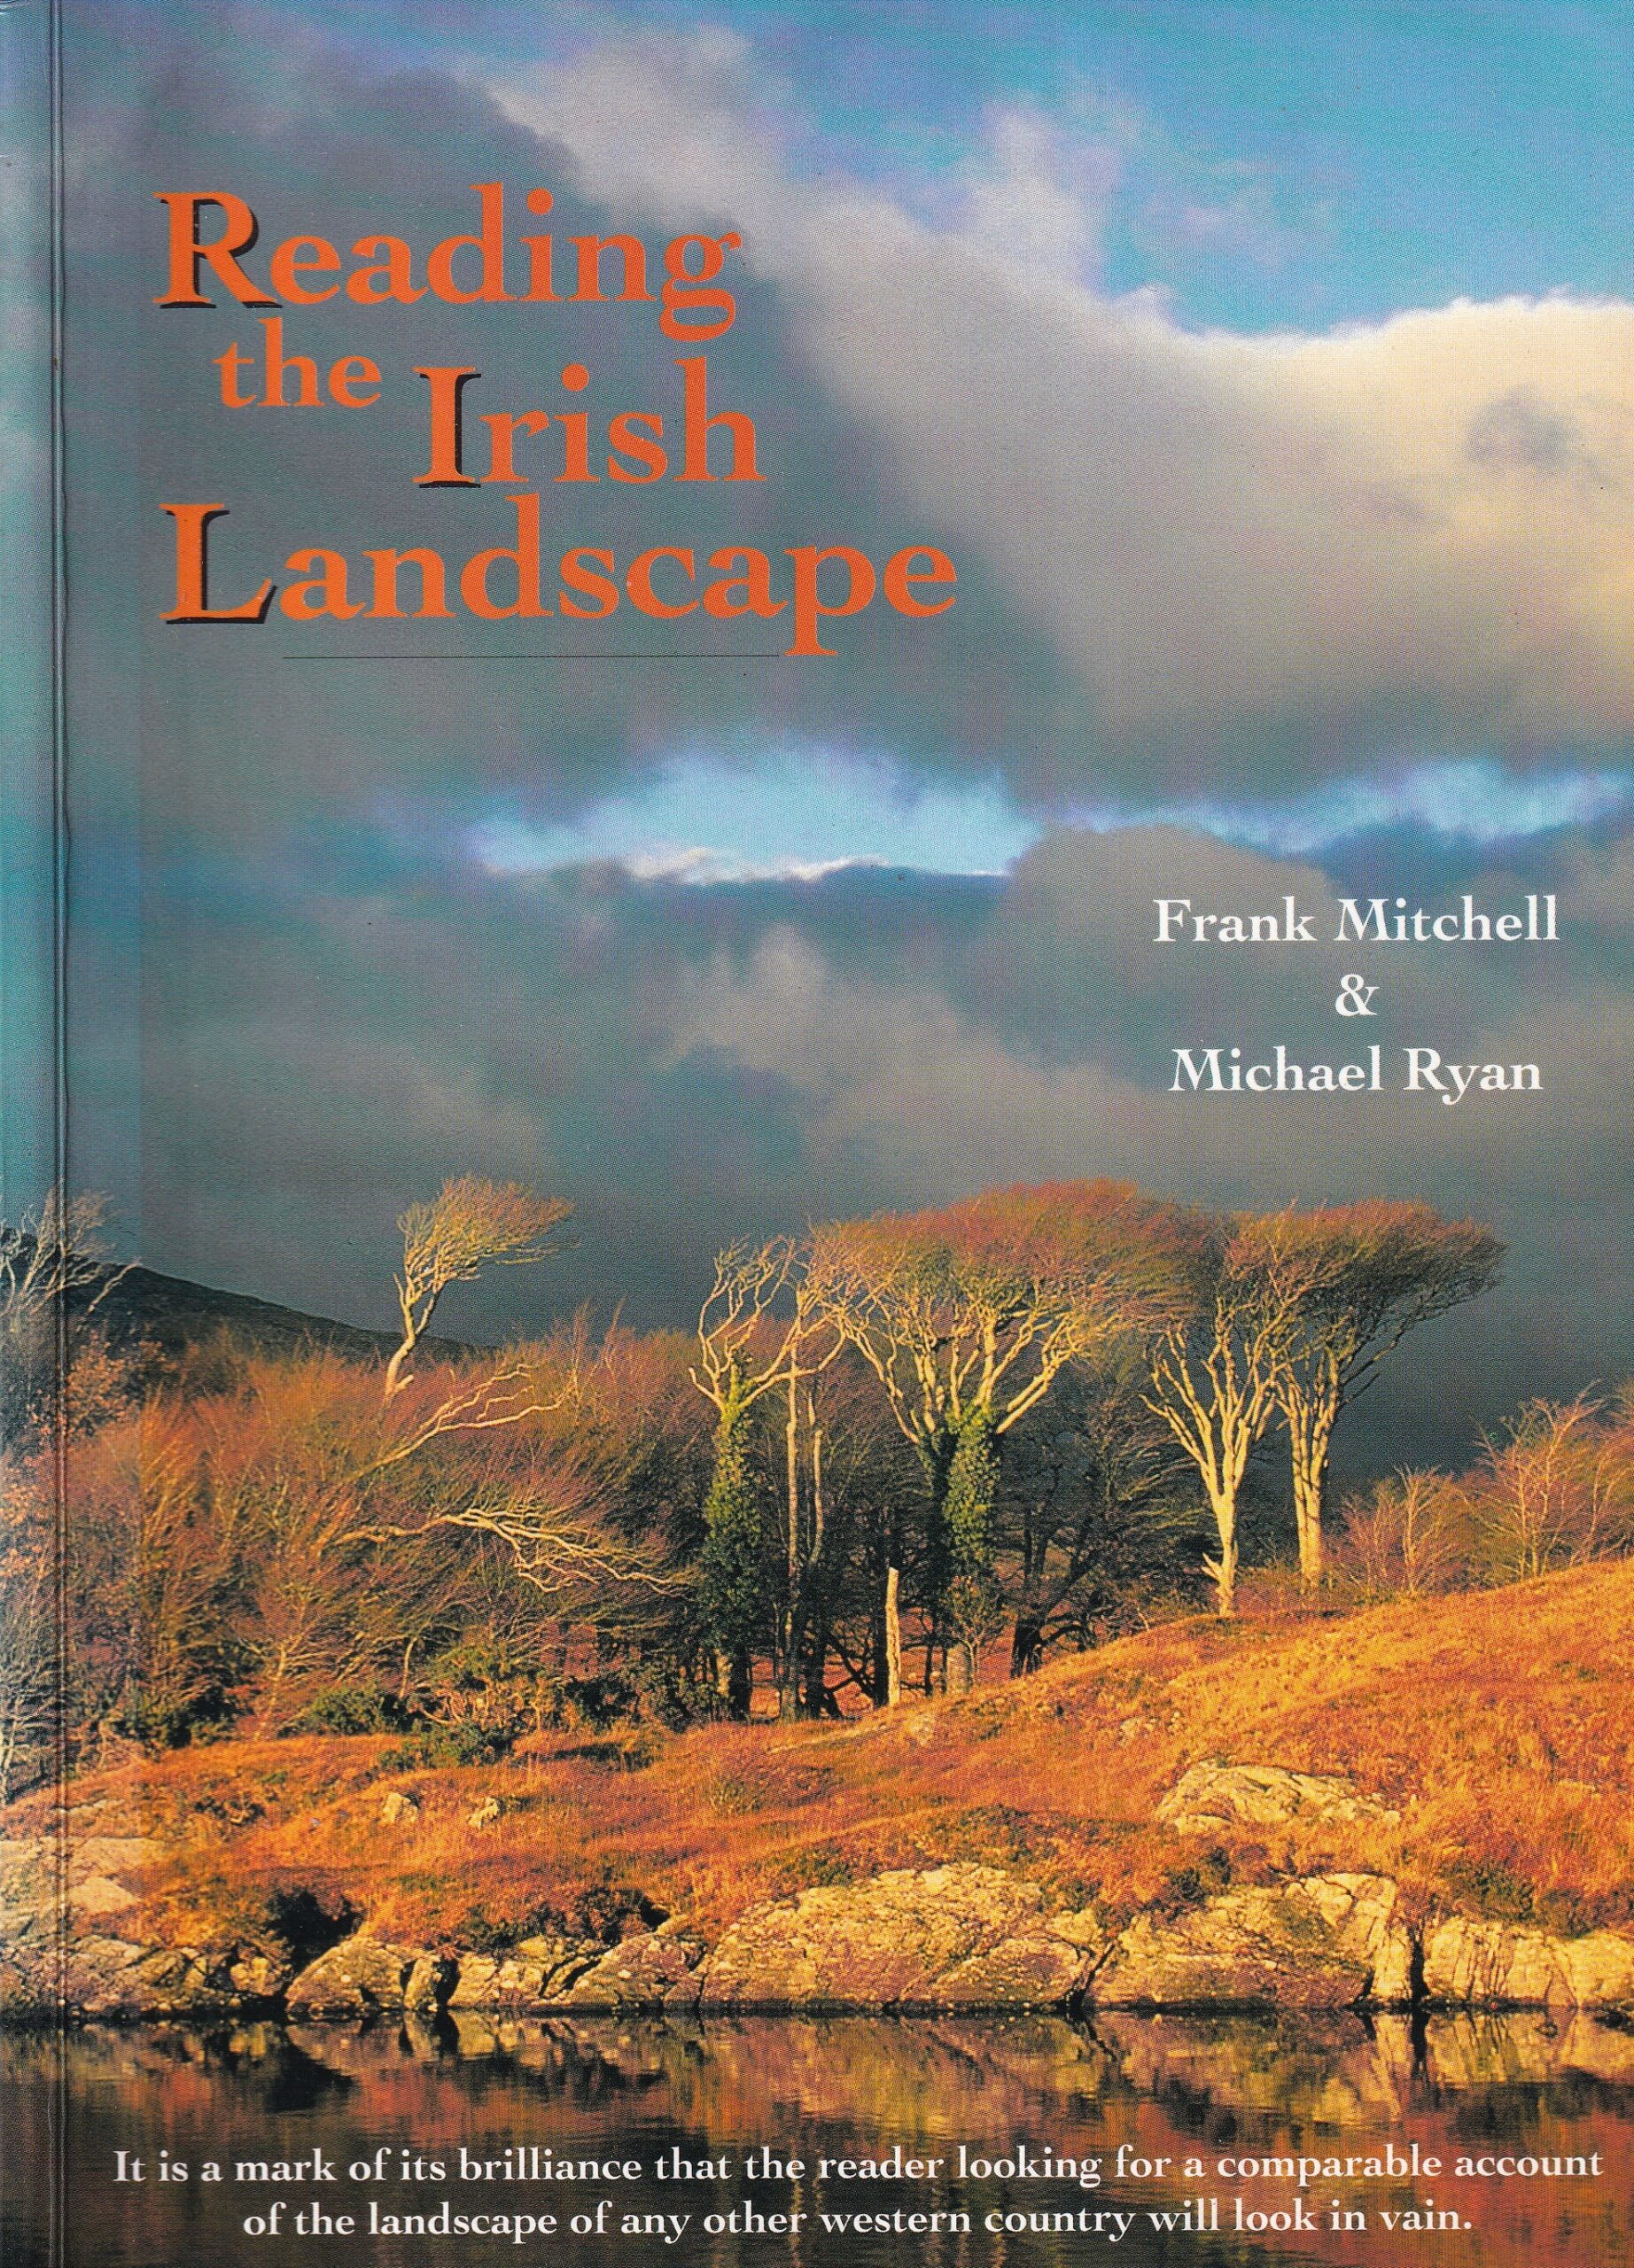 Reading the Irish Landscape | Frank Mitchell and Michael Ryan | Charlie Byrne's